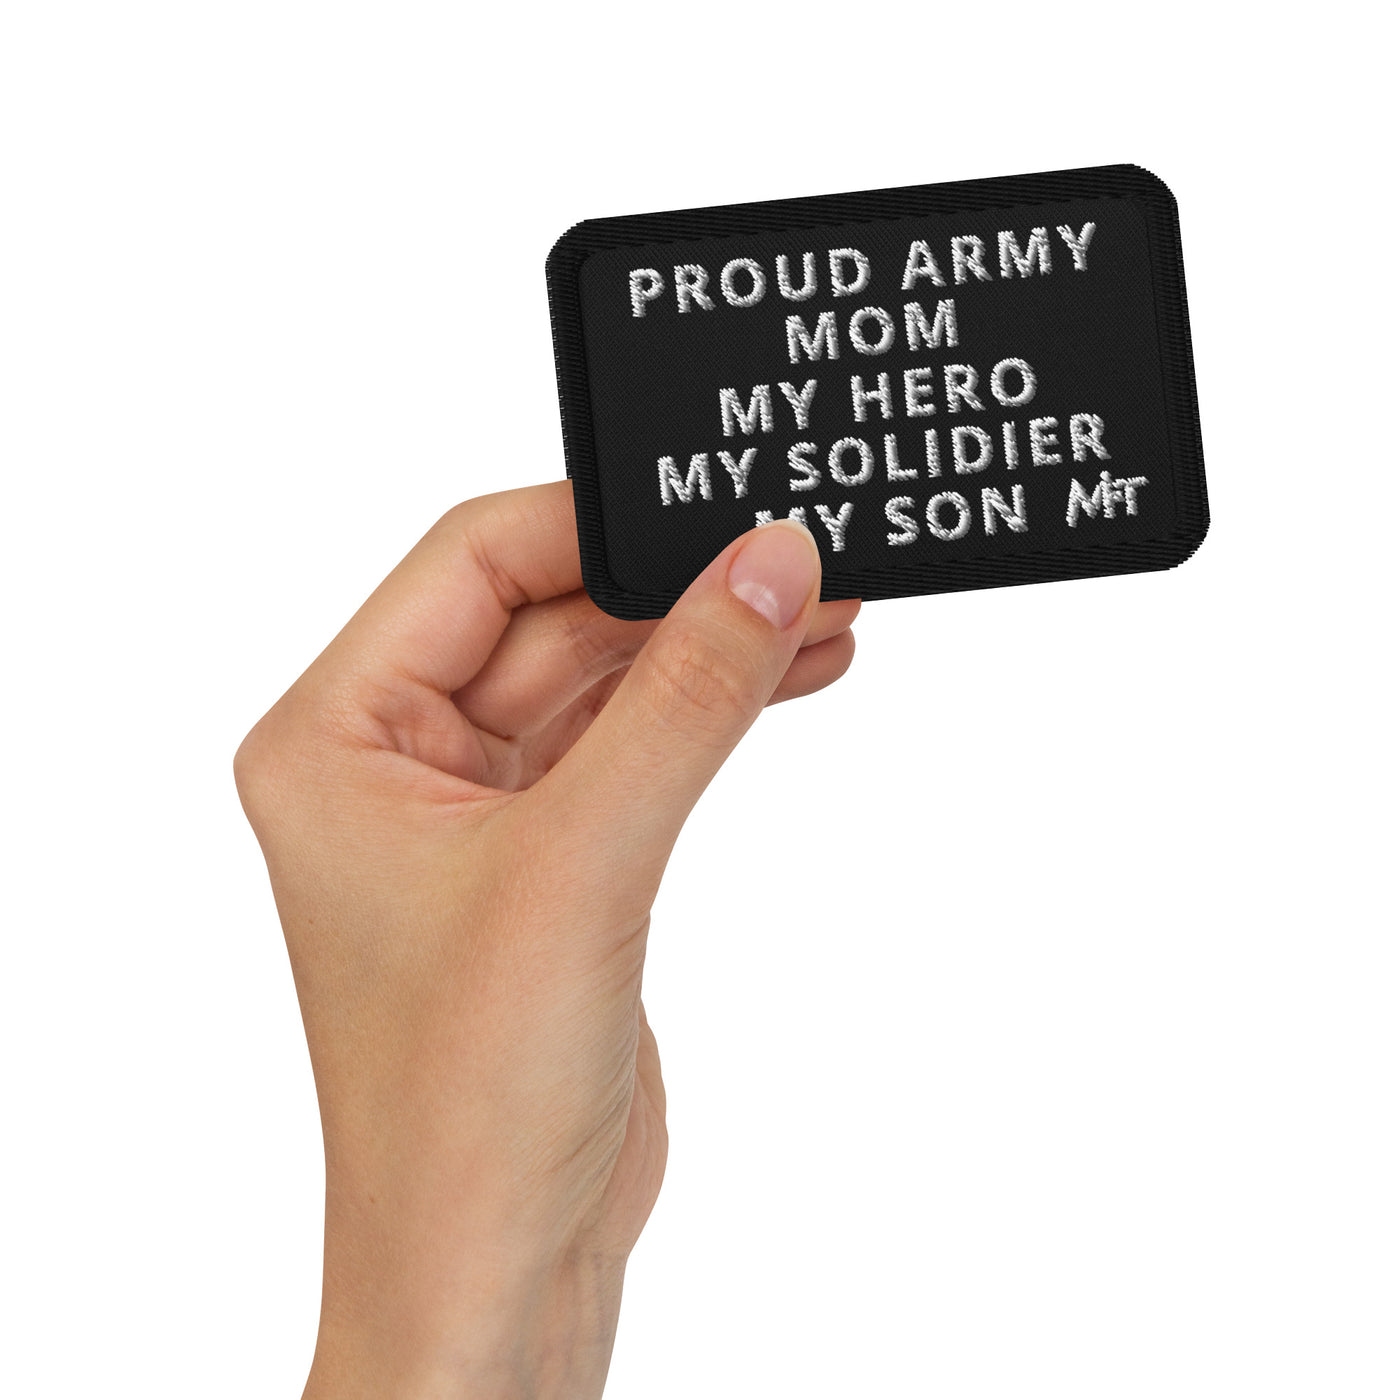 Proud Army Mom - Embroidered patches